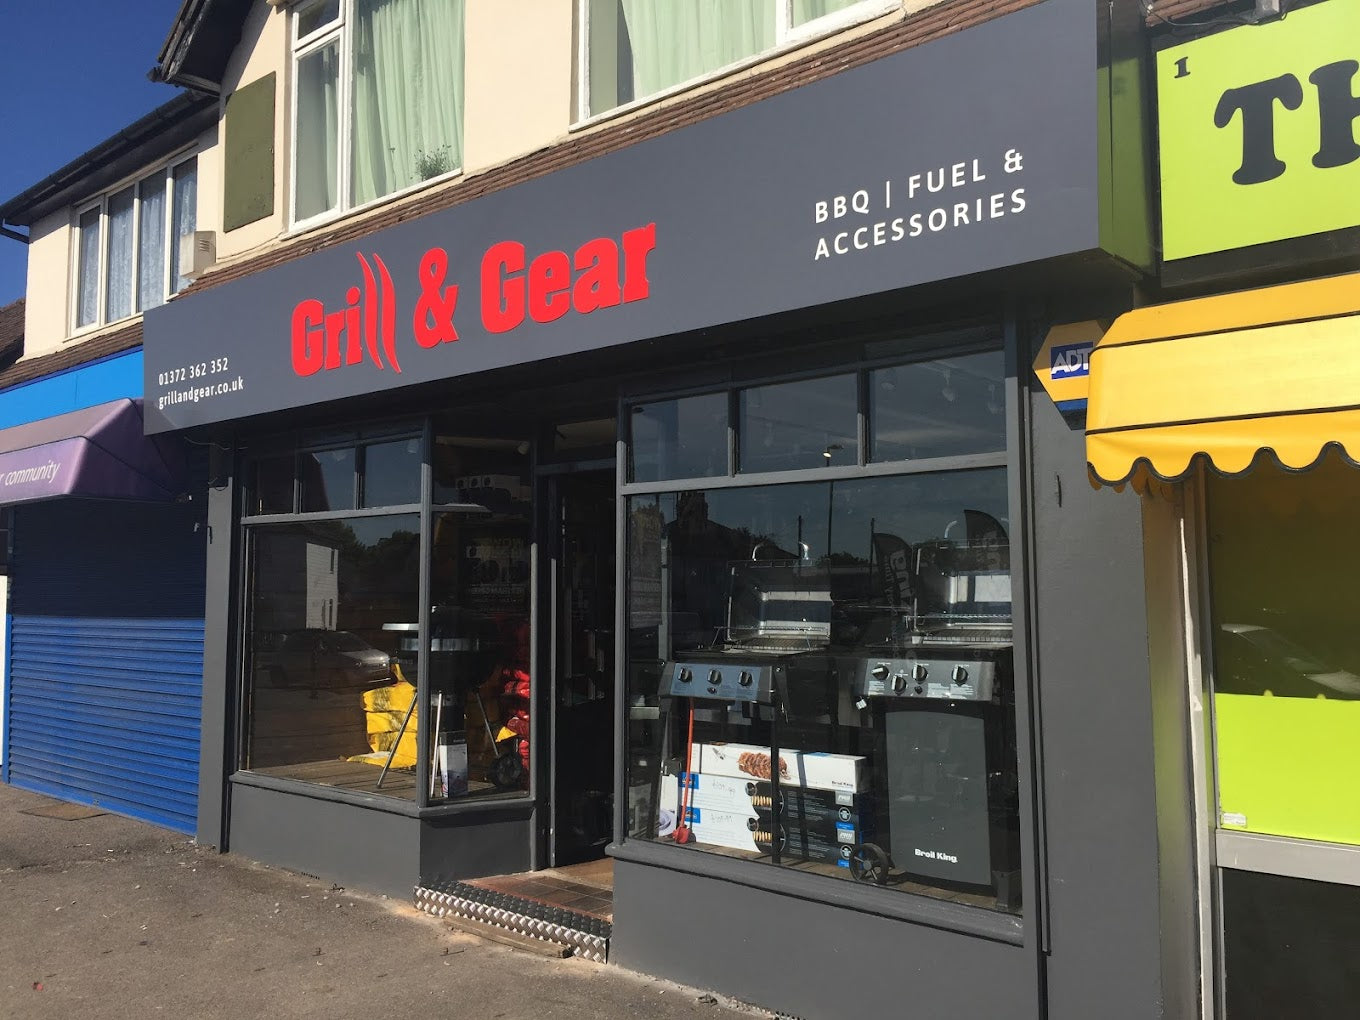 Grill & Gear Barbecue Shop in the UK